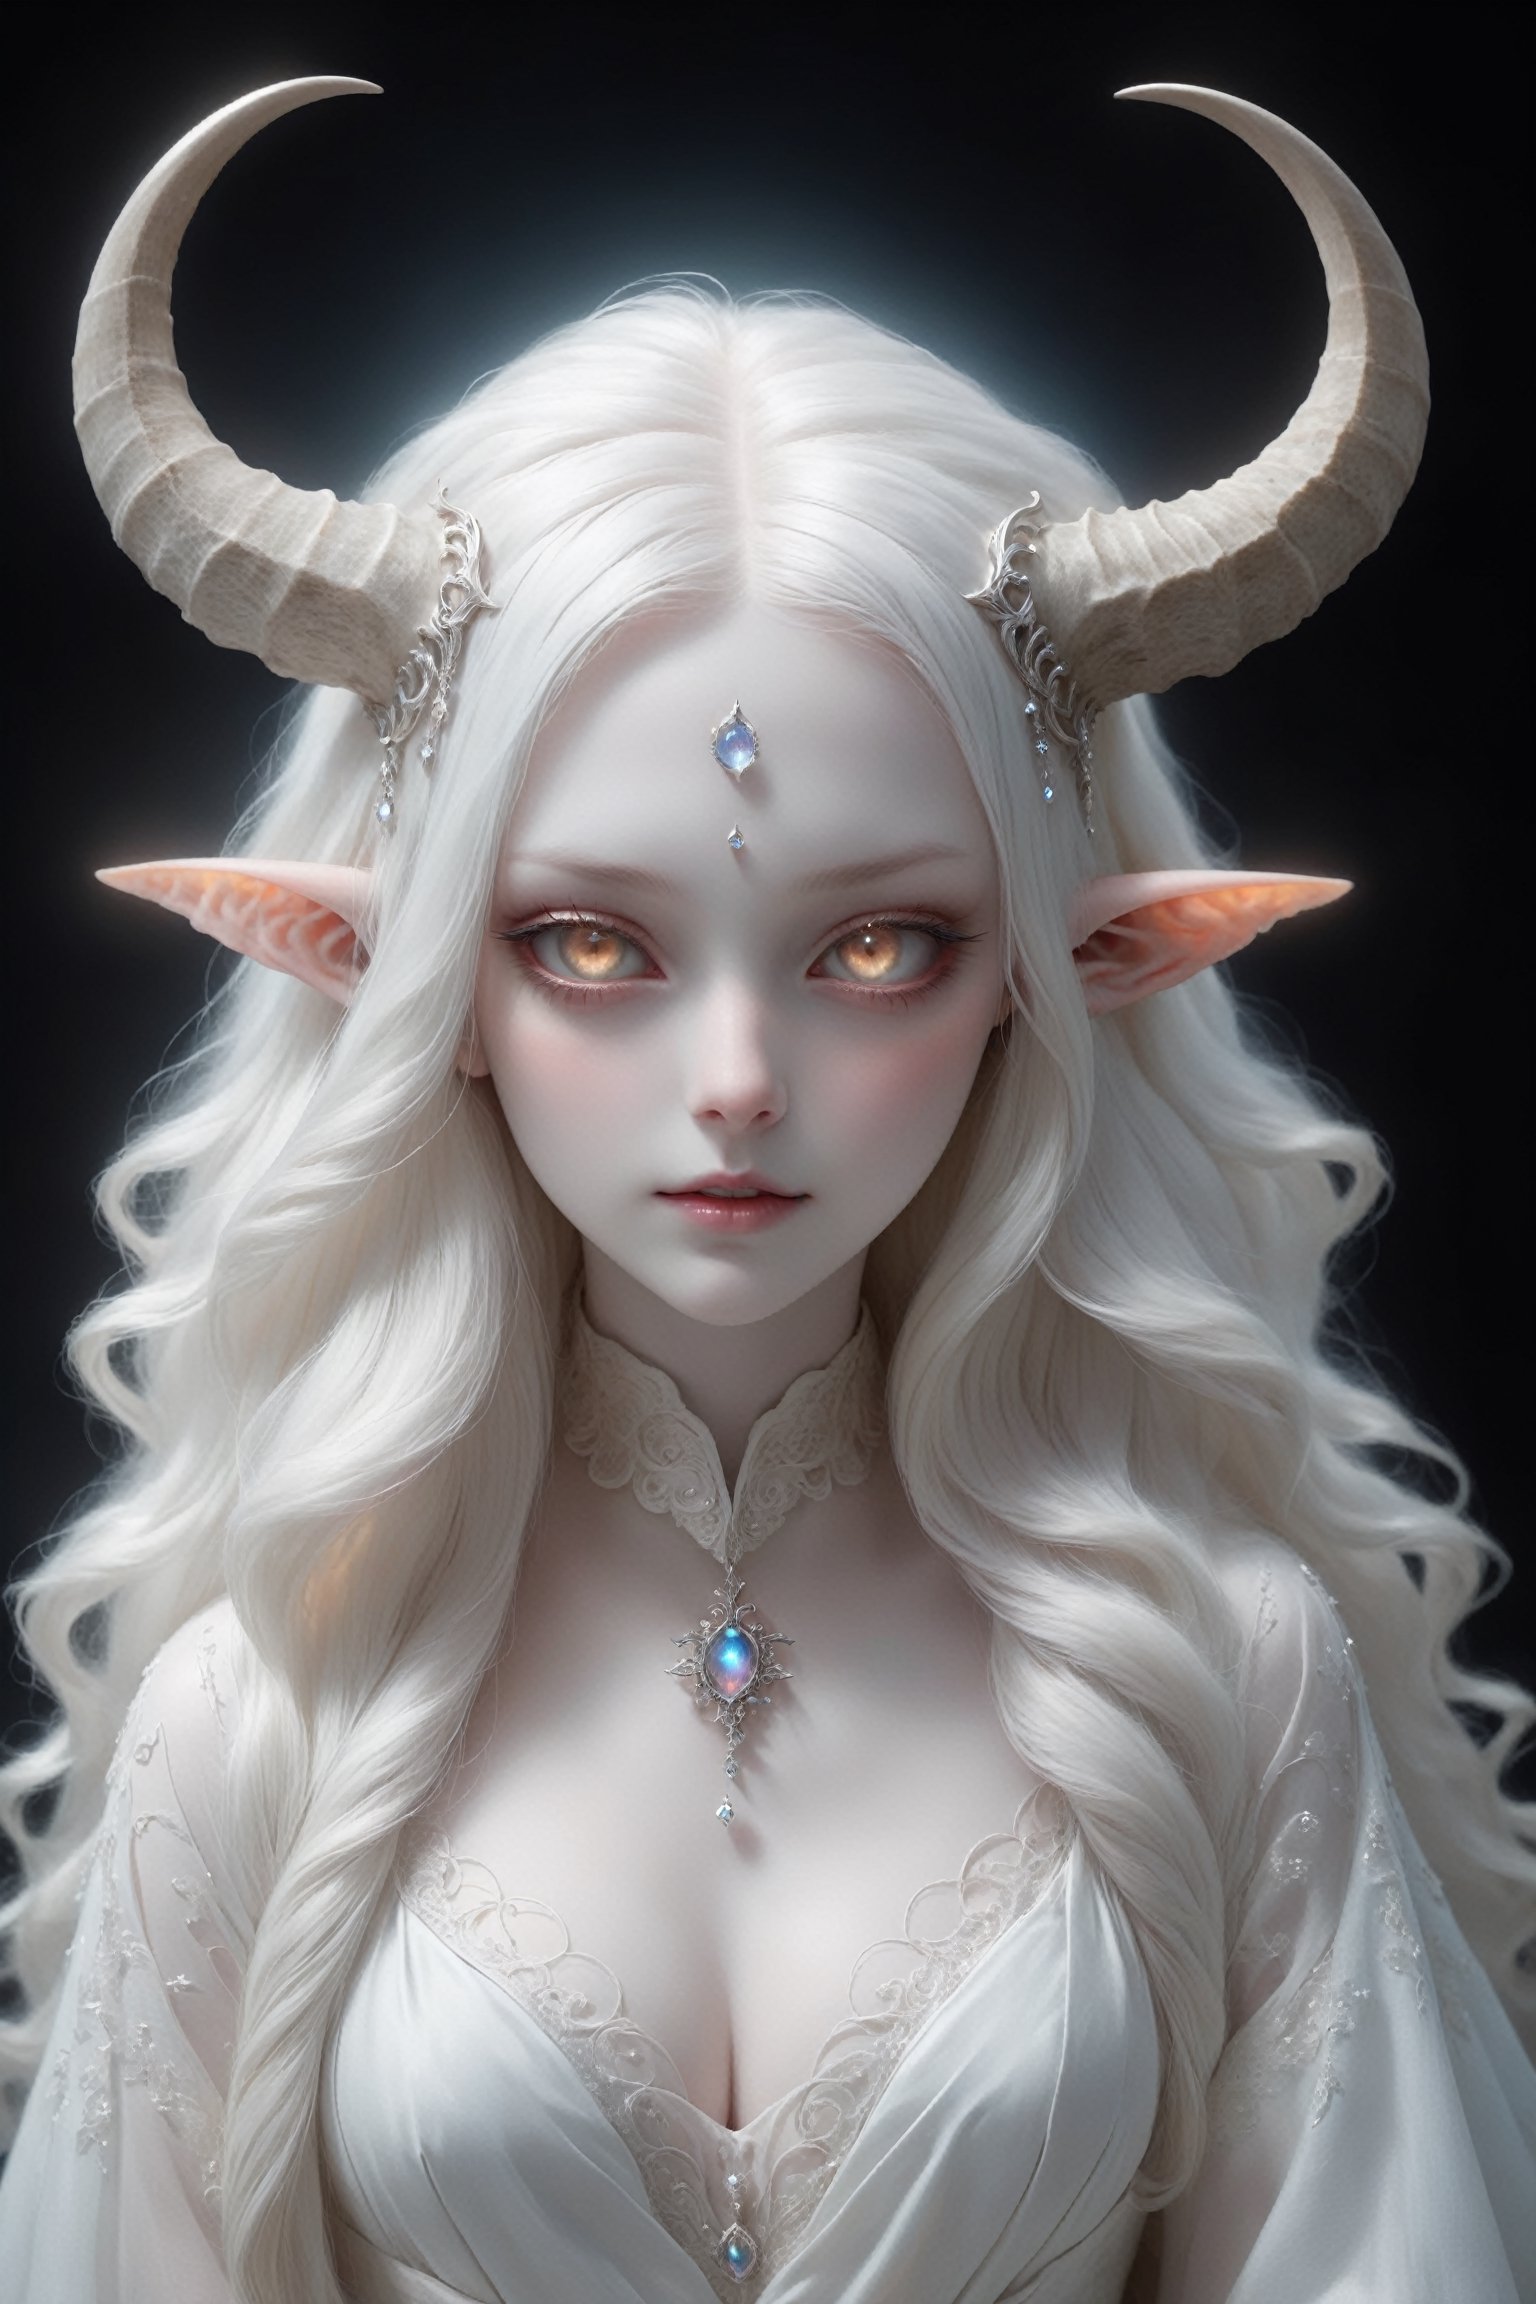 ((full_body)), (long intricate horns:1.2), sensual albino demon girl with enchantingly beautiful, alabaster skin, {{{naked breasts}}}, thinking, thoughtful, A benevolent smile, girl has beautiful deep eyes, soft expression, Depth and Dimension in the Pupils, Her porcelain-like white skin reflects an almost celestial glow, highlighting her ethereal nature, bright sunglight background, backlight, ornate jewels, the scene is Illuminated with soft enchanting light to accentuate the magical and mysterious atmosphere, goth person, realistic, Wonder of Art and Beauty, ghost person,ghost person,F41Arm0rXL ,DonMM4g1cXL ,glitter,shiny